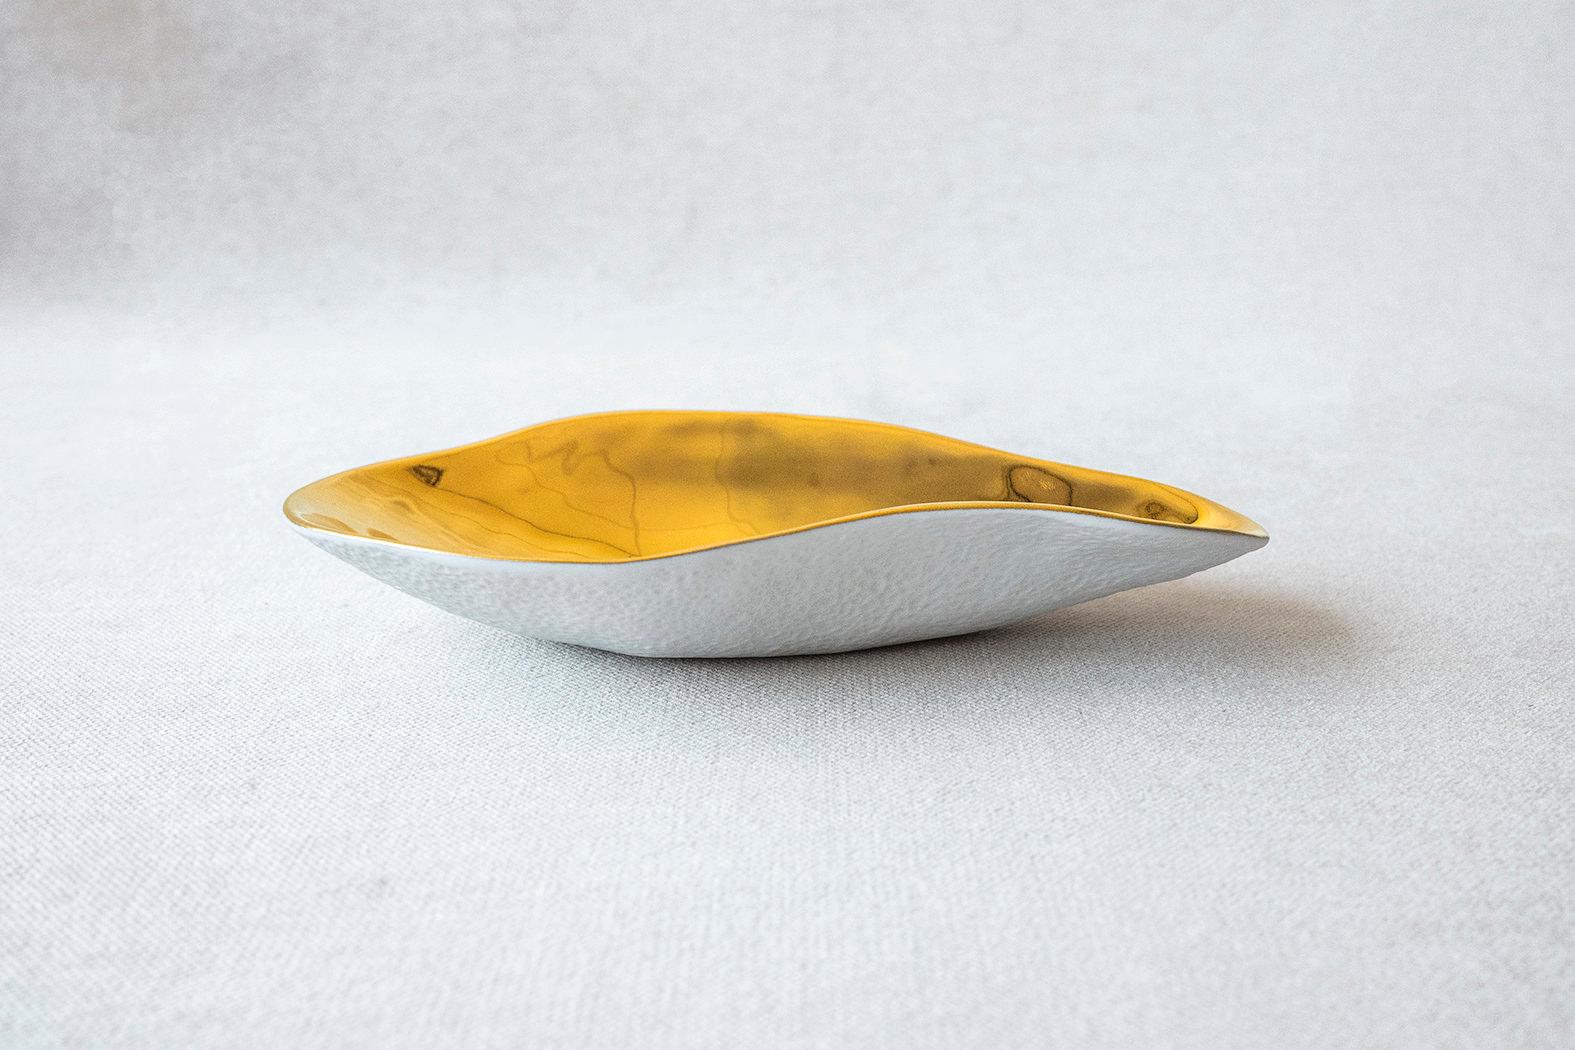 Contemporary Set of 2 x Indulge nº3 / Gold / Side Dish, Handmade Porcelain Tableware For Sale